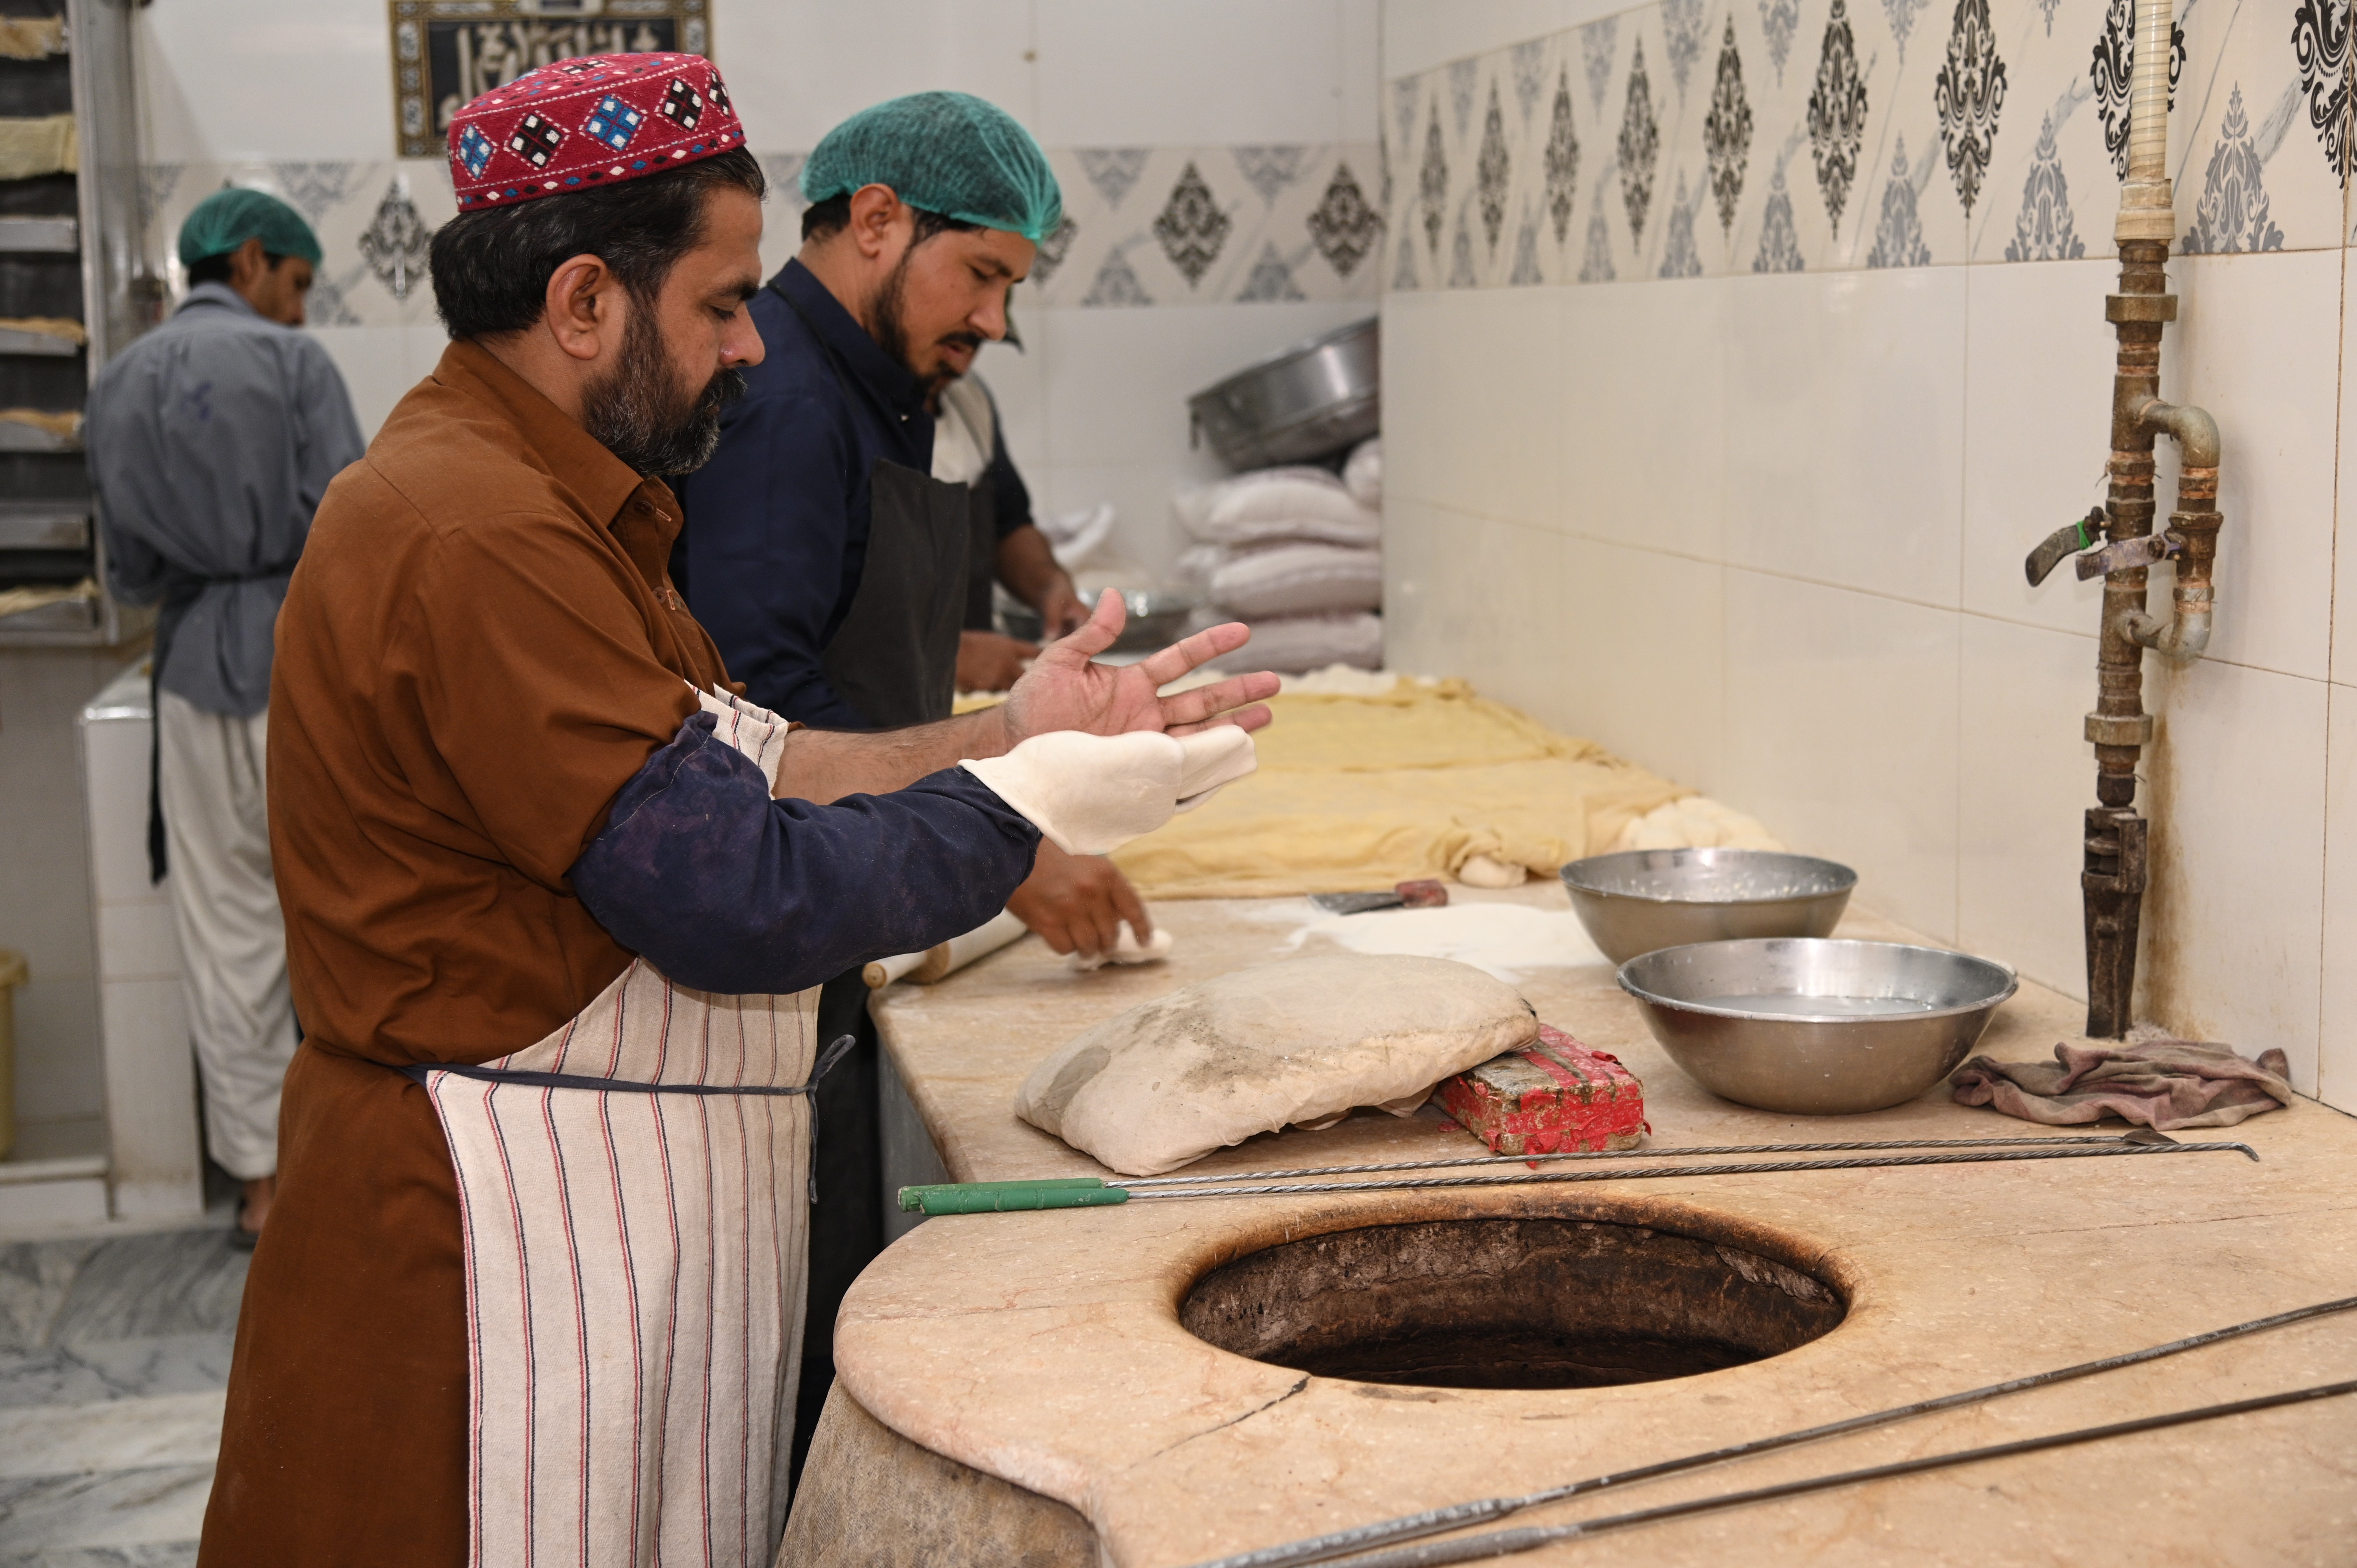 A man making naan (flatbread) which is leavened, oven-baked or tawa-fried.